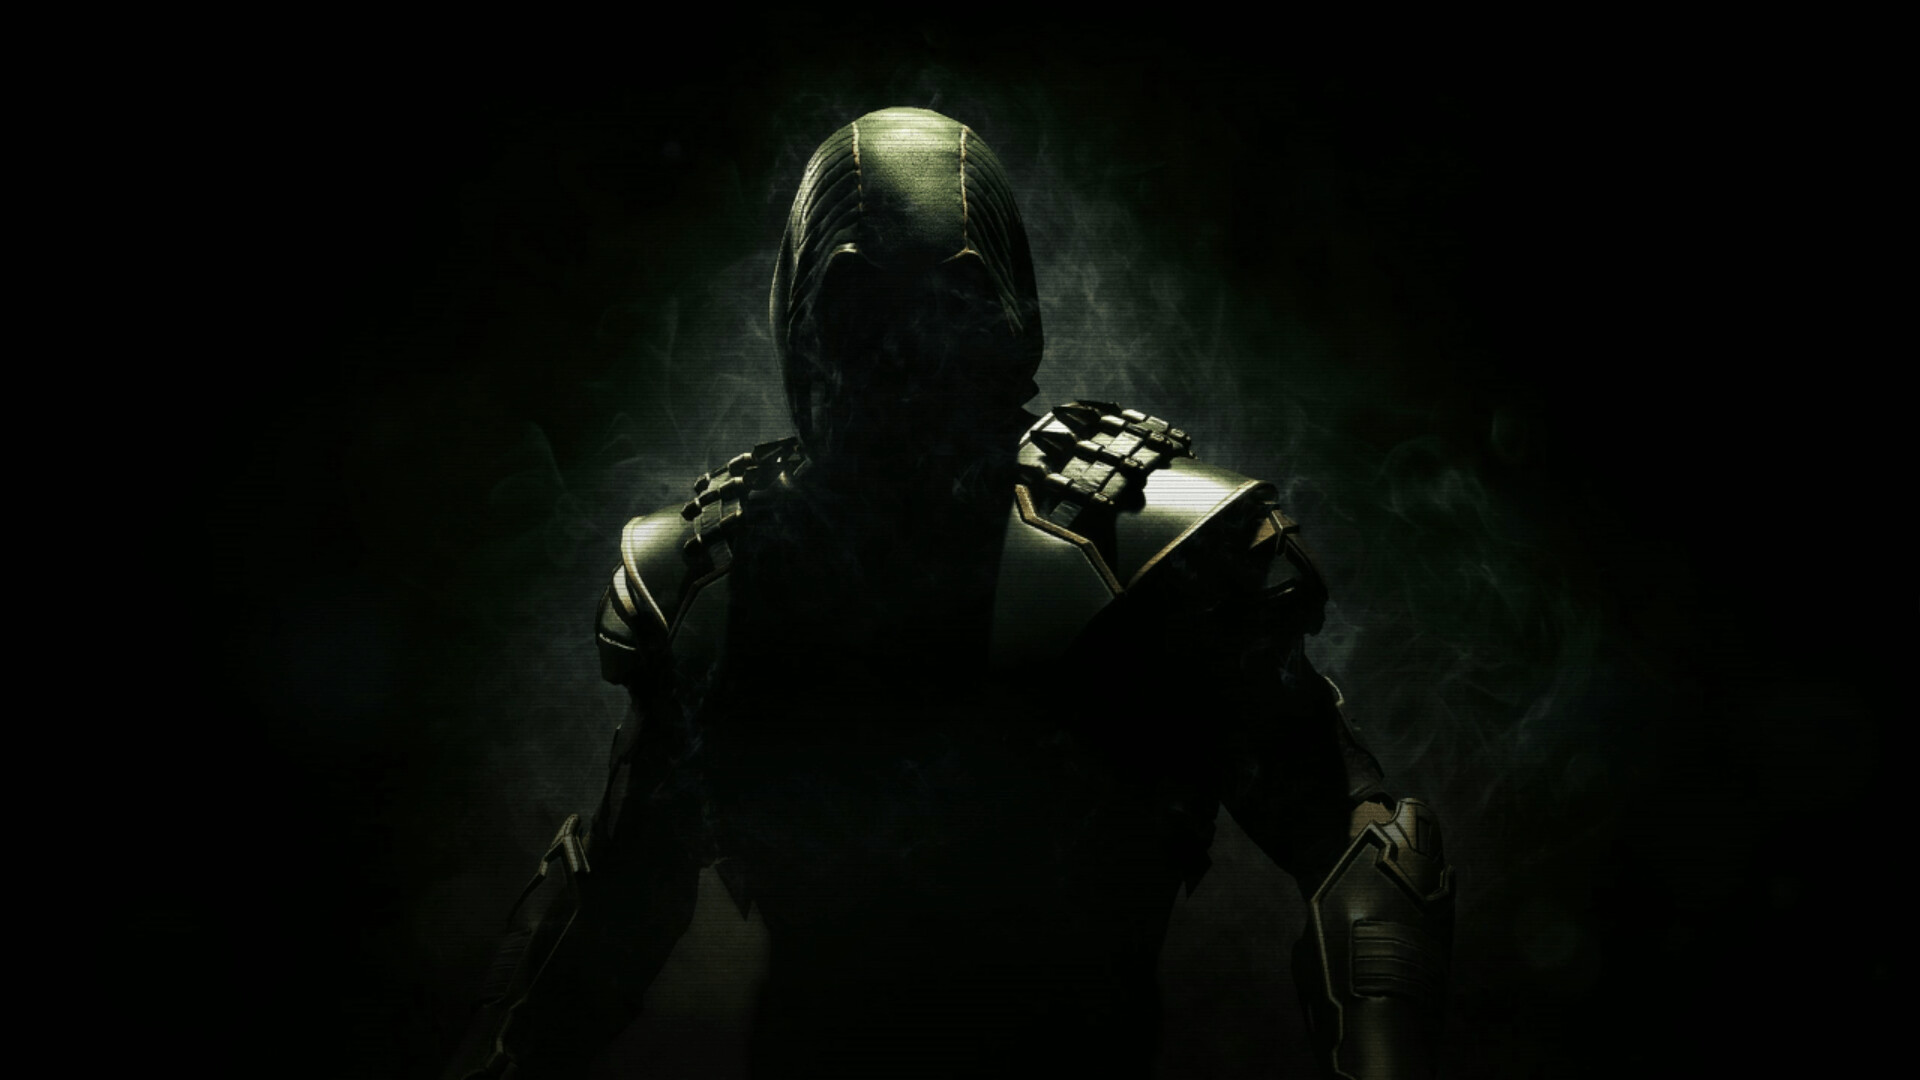 Green Arrow: DC character, An archer who uses his skills to fight crime. 1920x1080 Full HD Wallpaper.